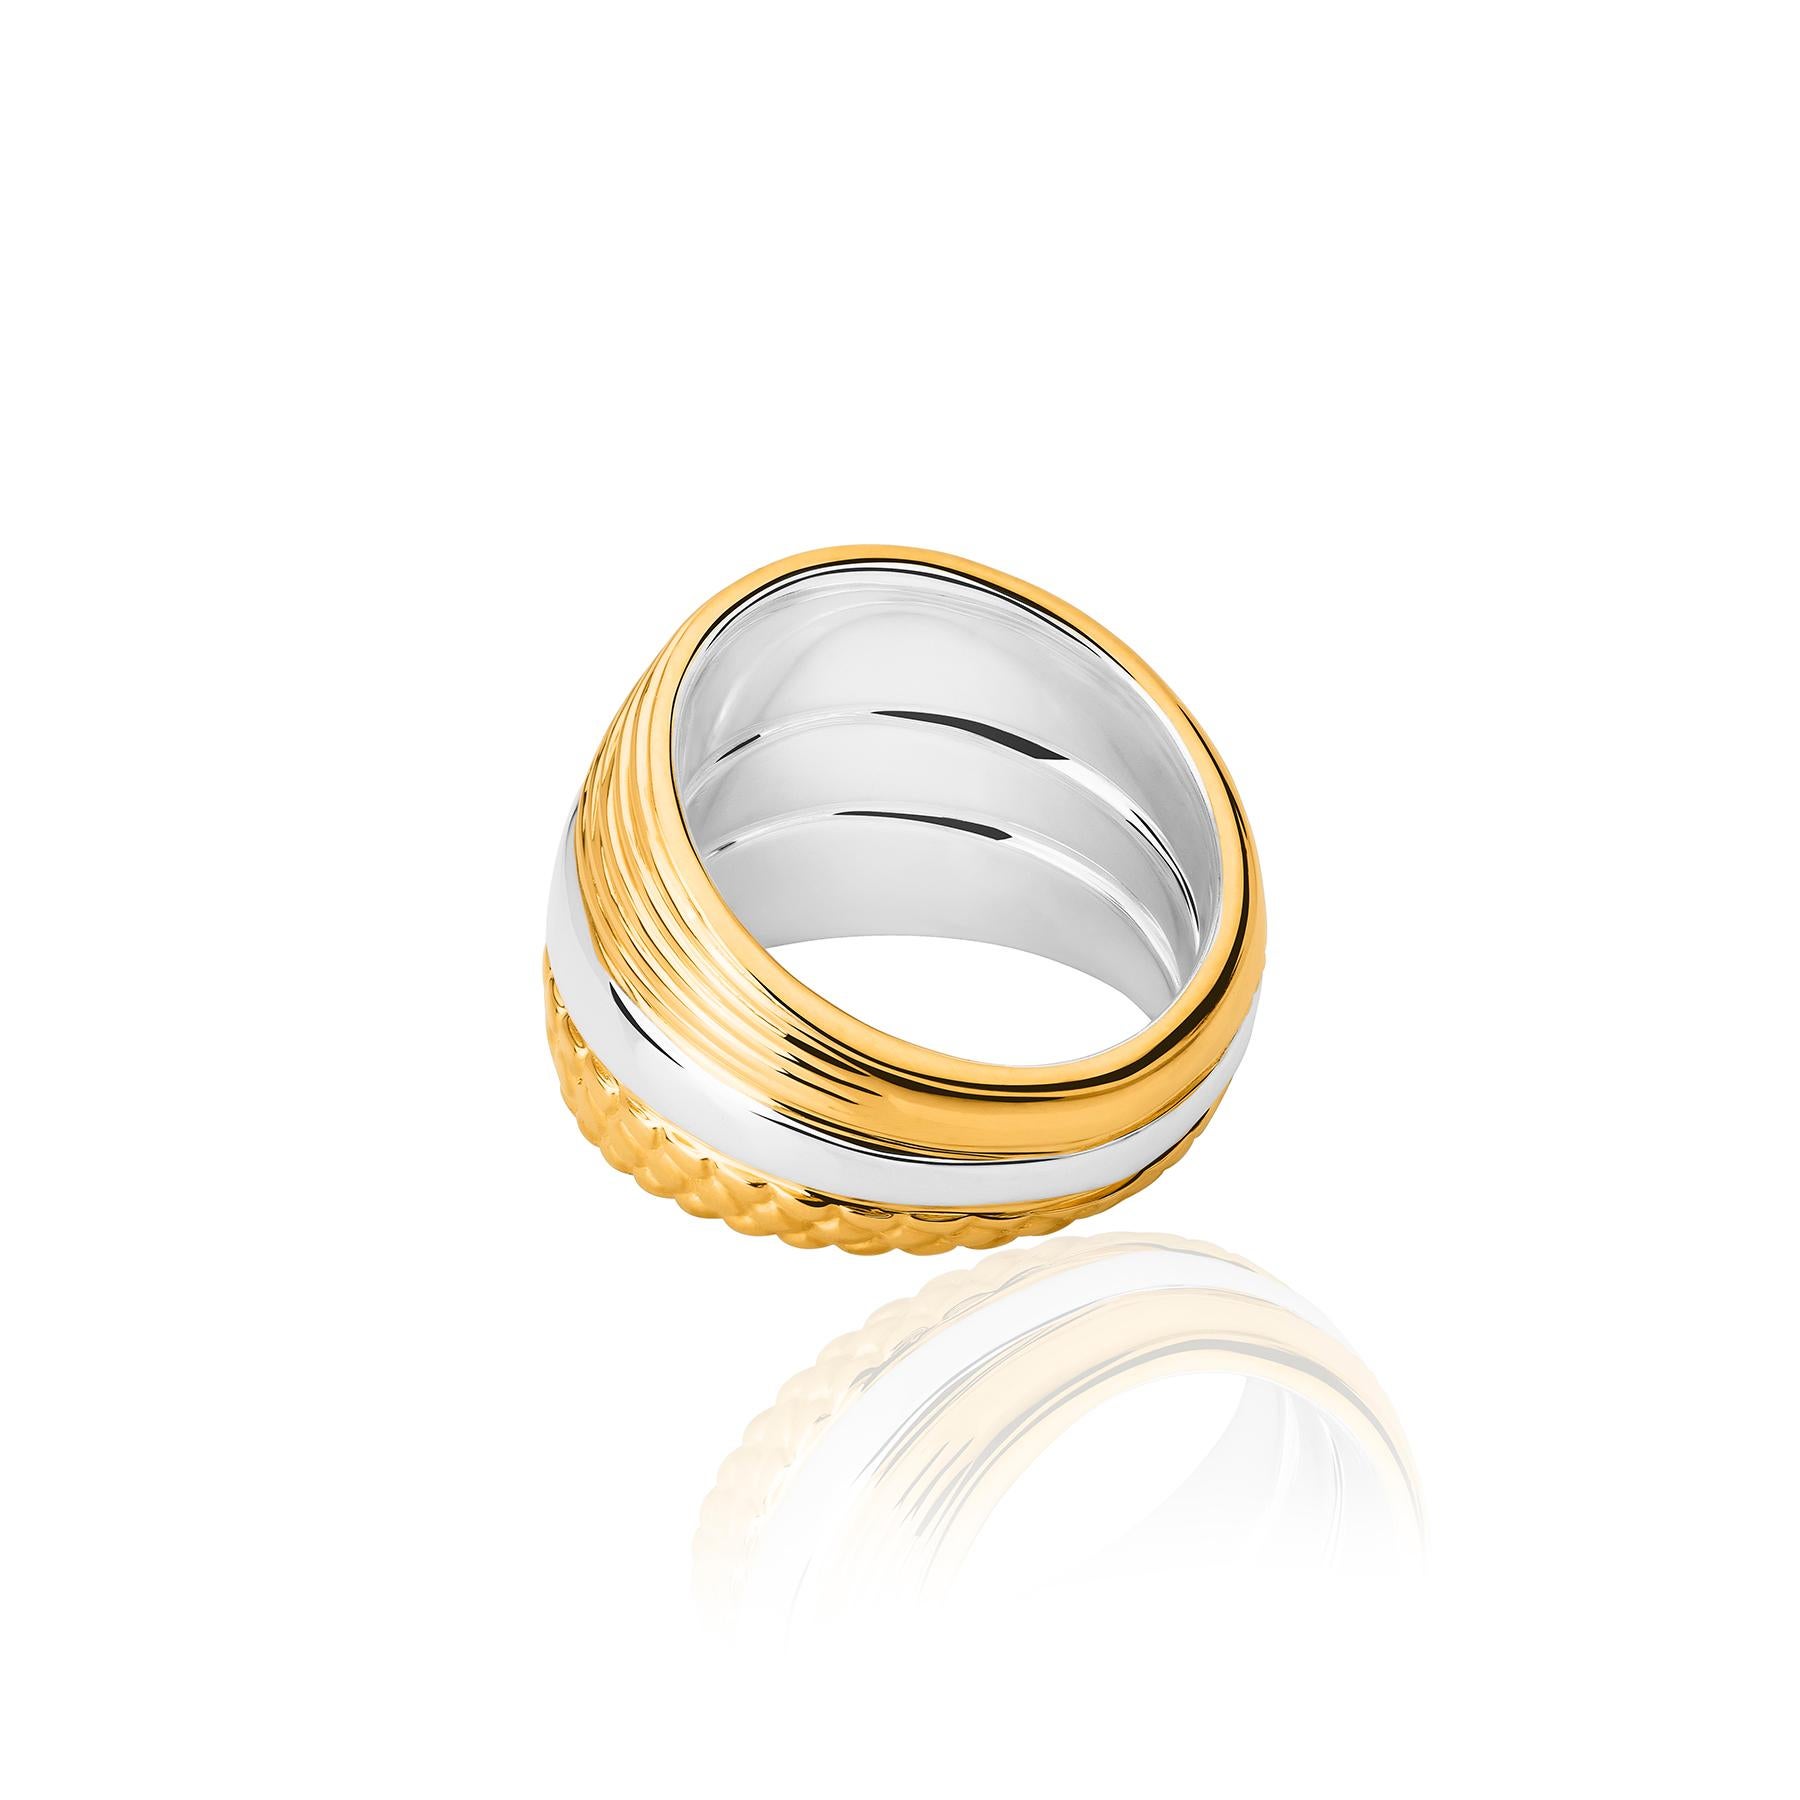 The Fish Textures Ring from the Animales Collection by TANE is made of sterling silver with 23 karat  yellow gold vermeil. It is made up of three linked rings. The central area of polished silver contrasts with the adjacent ones, delicately